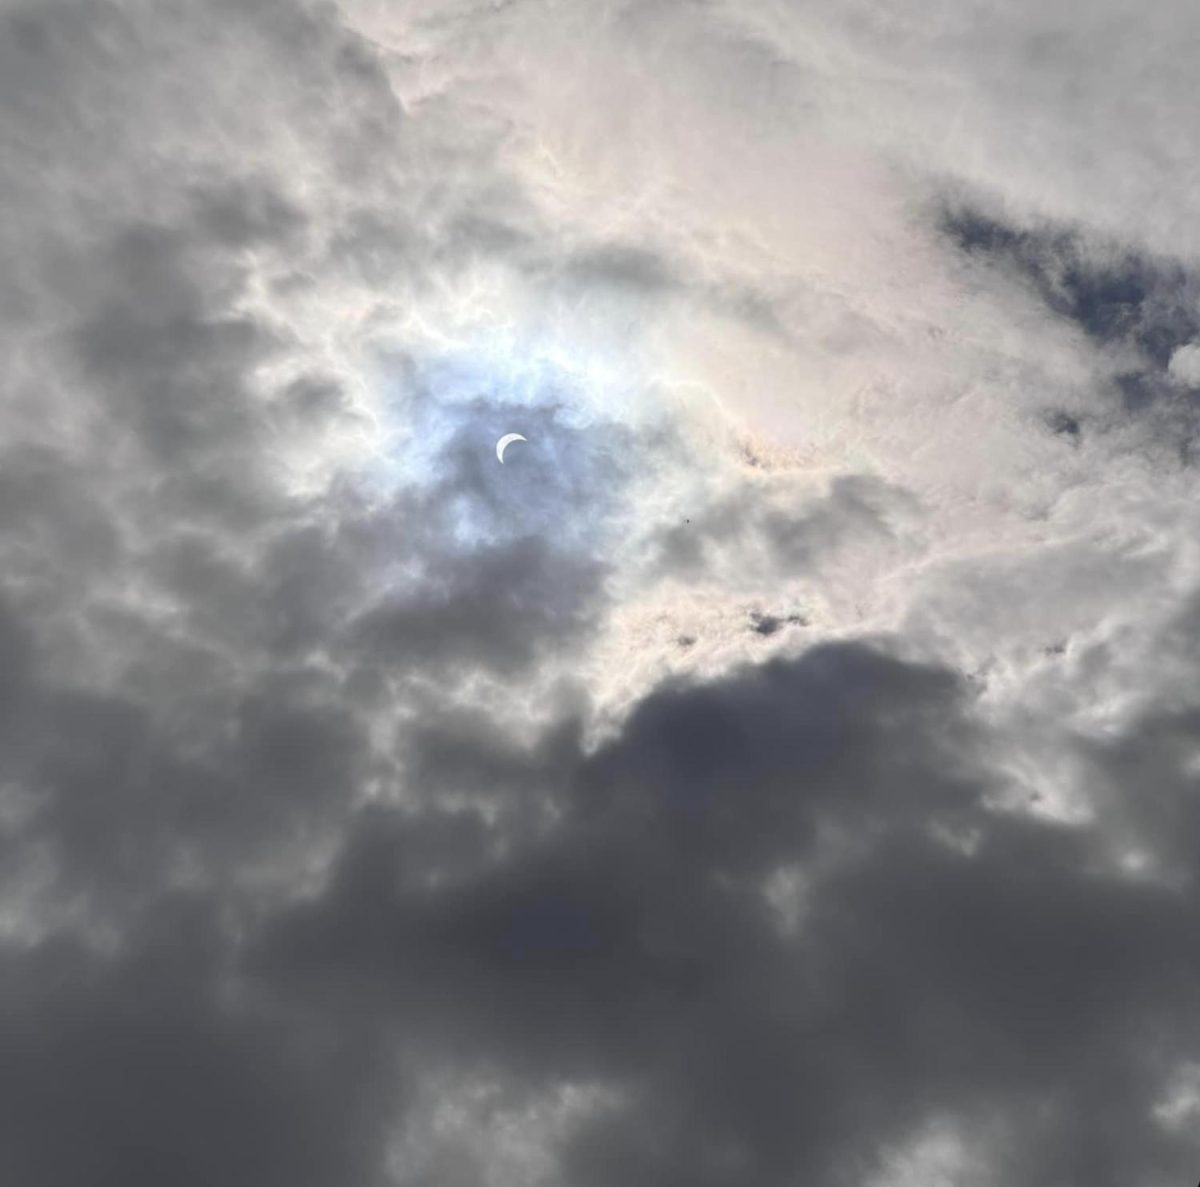 Images+of+the+eclipse+right+before+the+clouds+obstructed+views